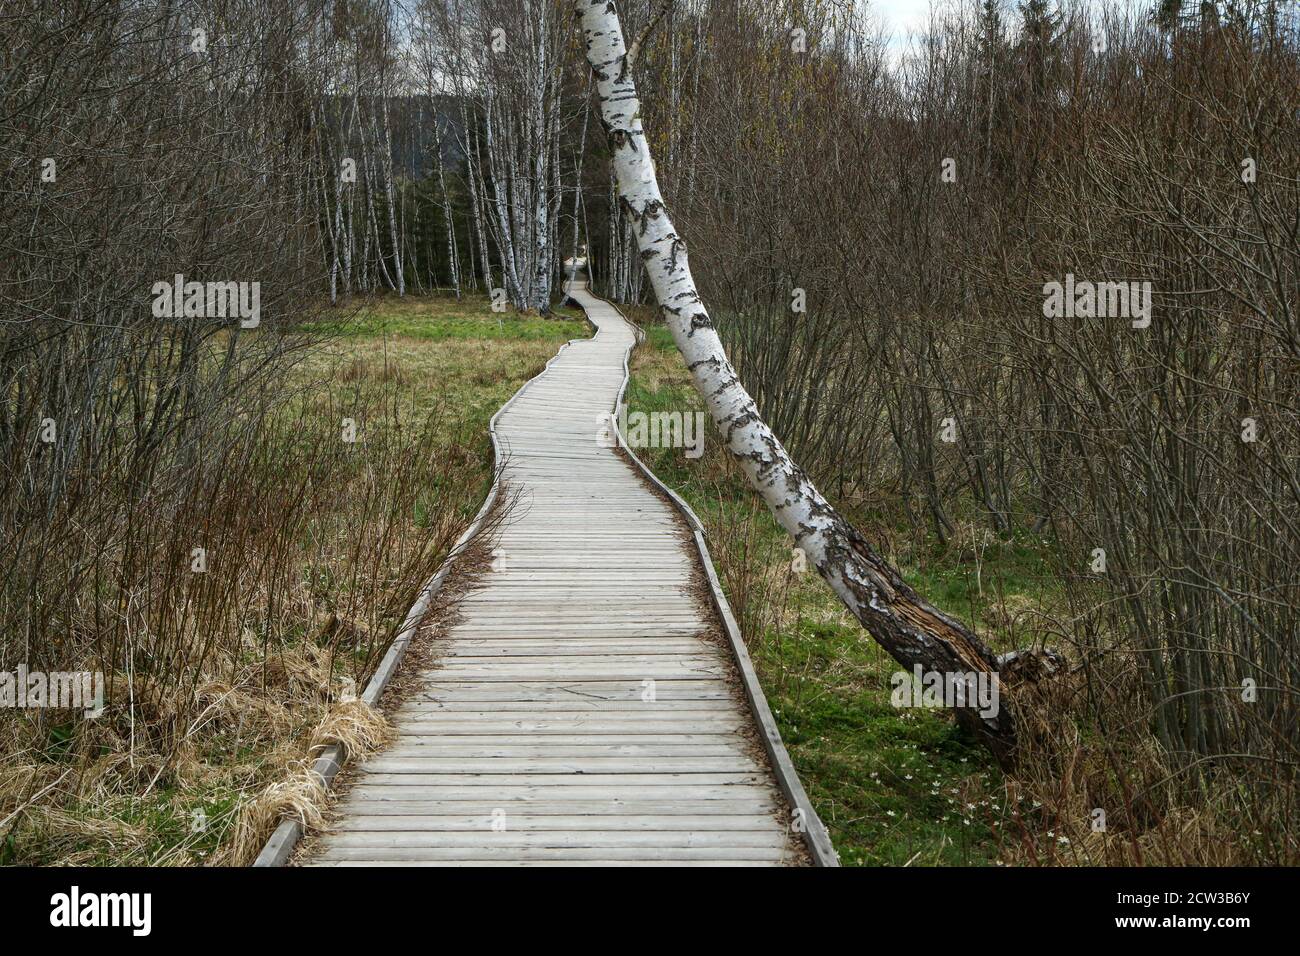 The picture from the protected area in Czech Republic called 'Chalupská slať' (Hut peat bog) at Šumava. The wooden pathways lead over the peat bogs. Stock Photo